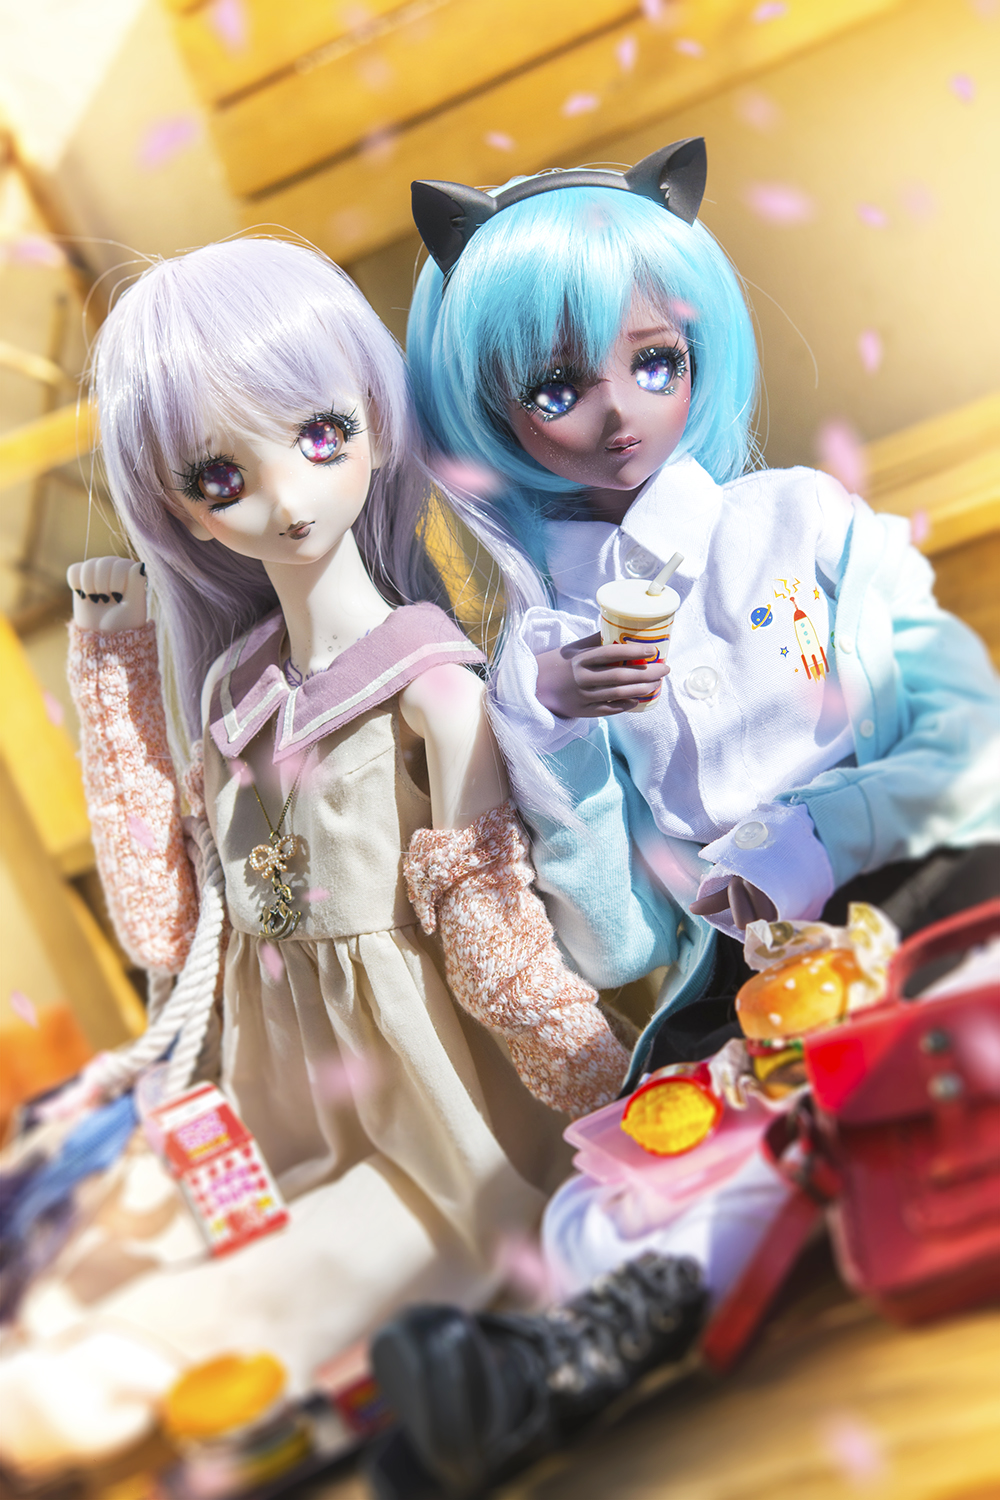 [Dollfie Icon / Dollfie Dream]   ✧* ✧*  Cooking time !  // The Fox Knight  *✧ *✧ - Page 14 32266359467_93205140f1_o